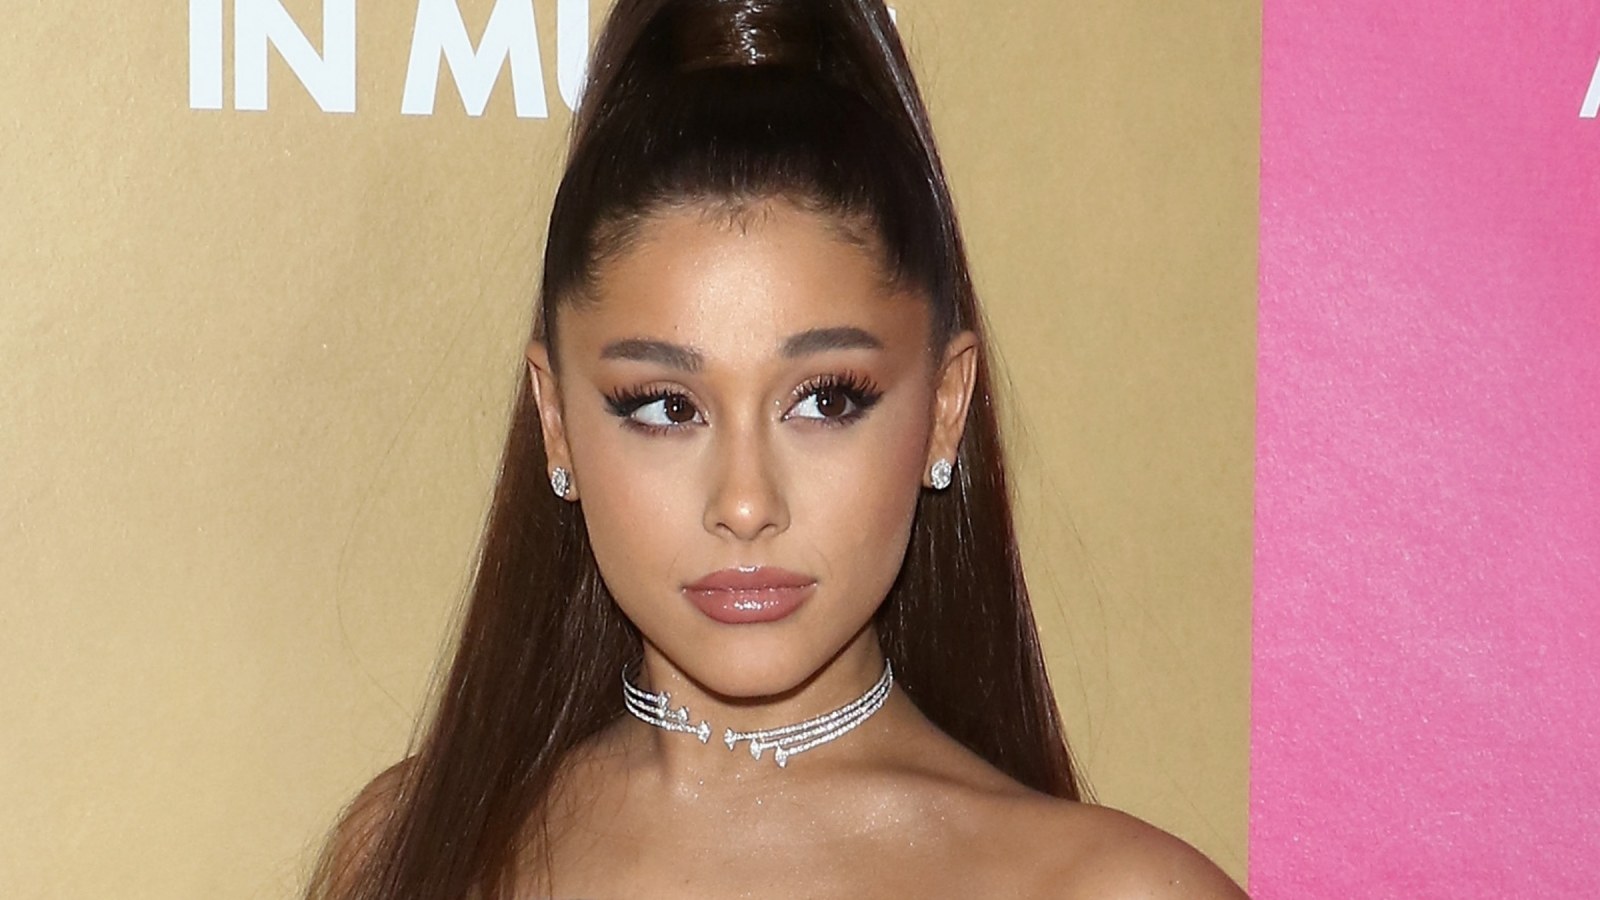 Ariana Grande's song 'Break Free' features which artist?